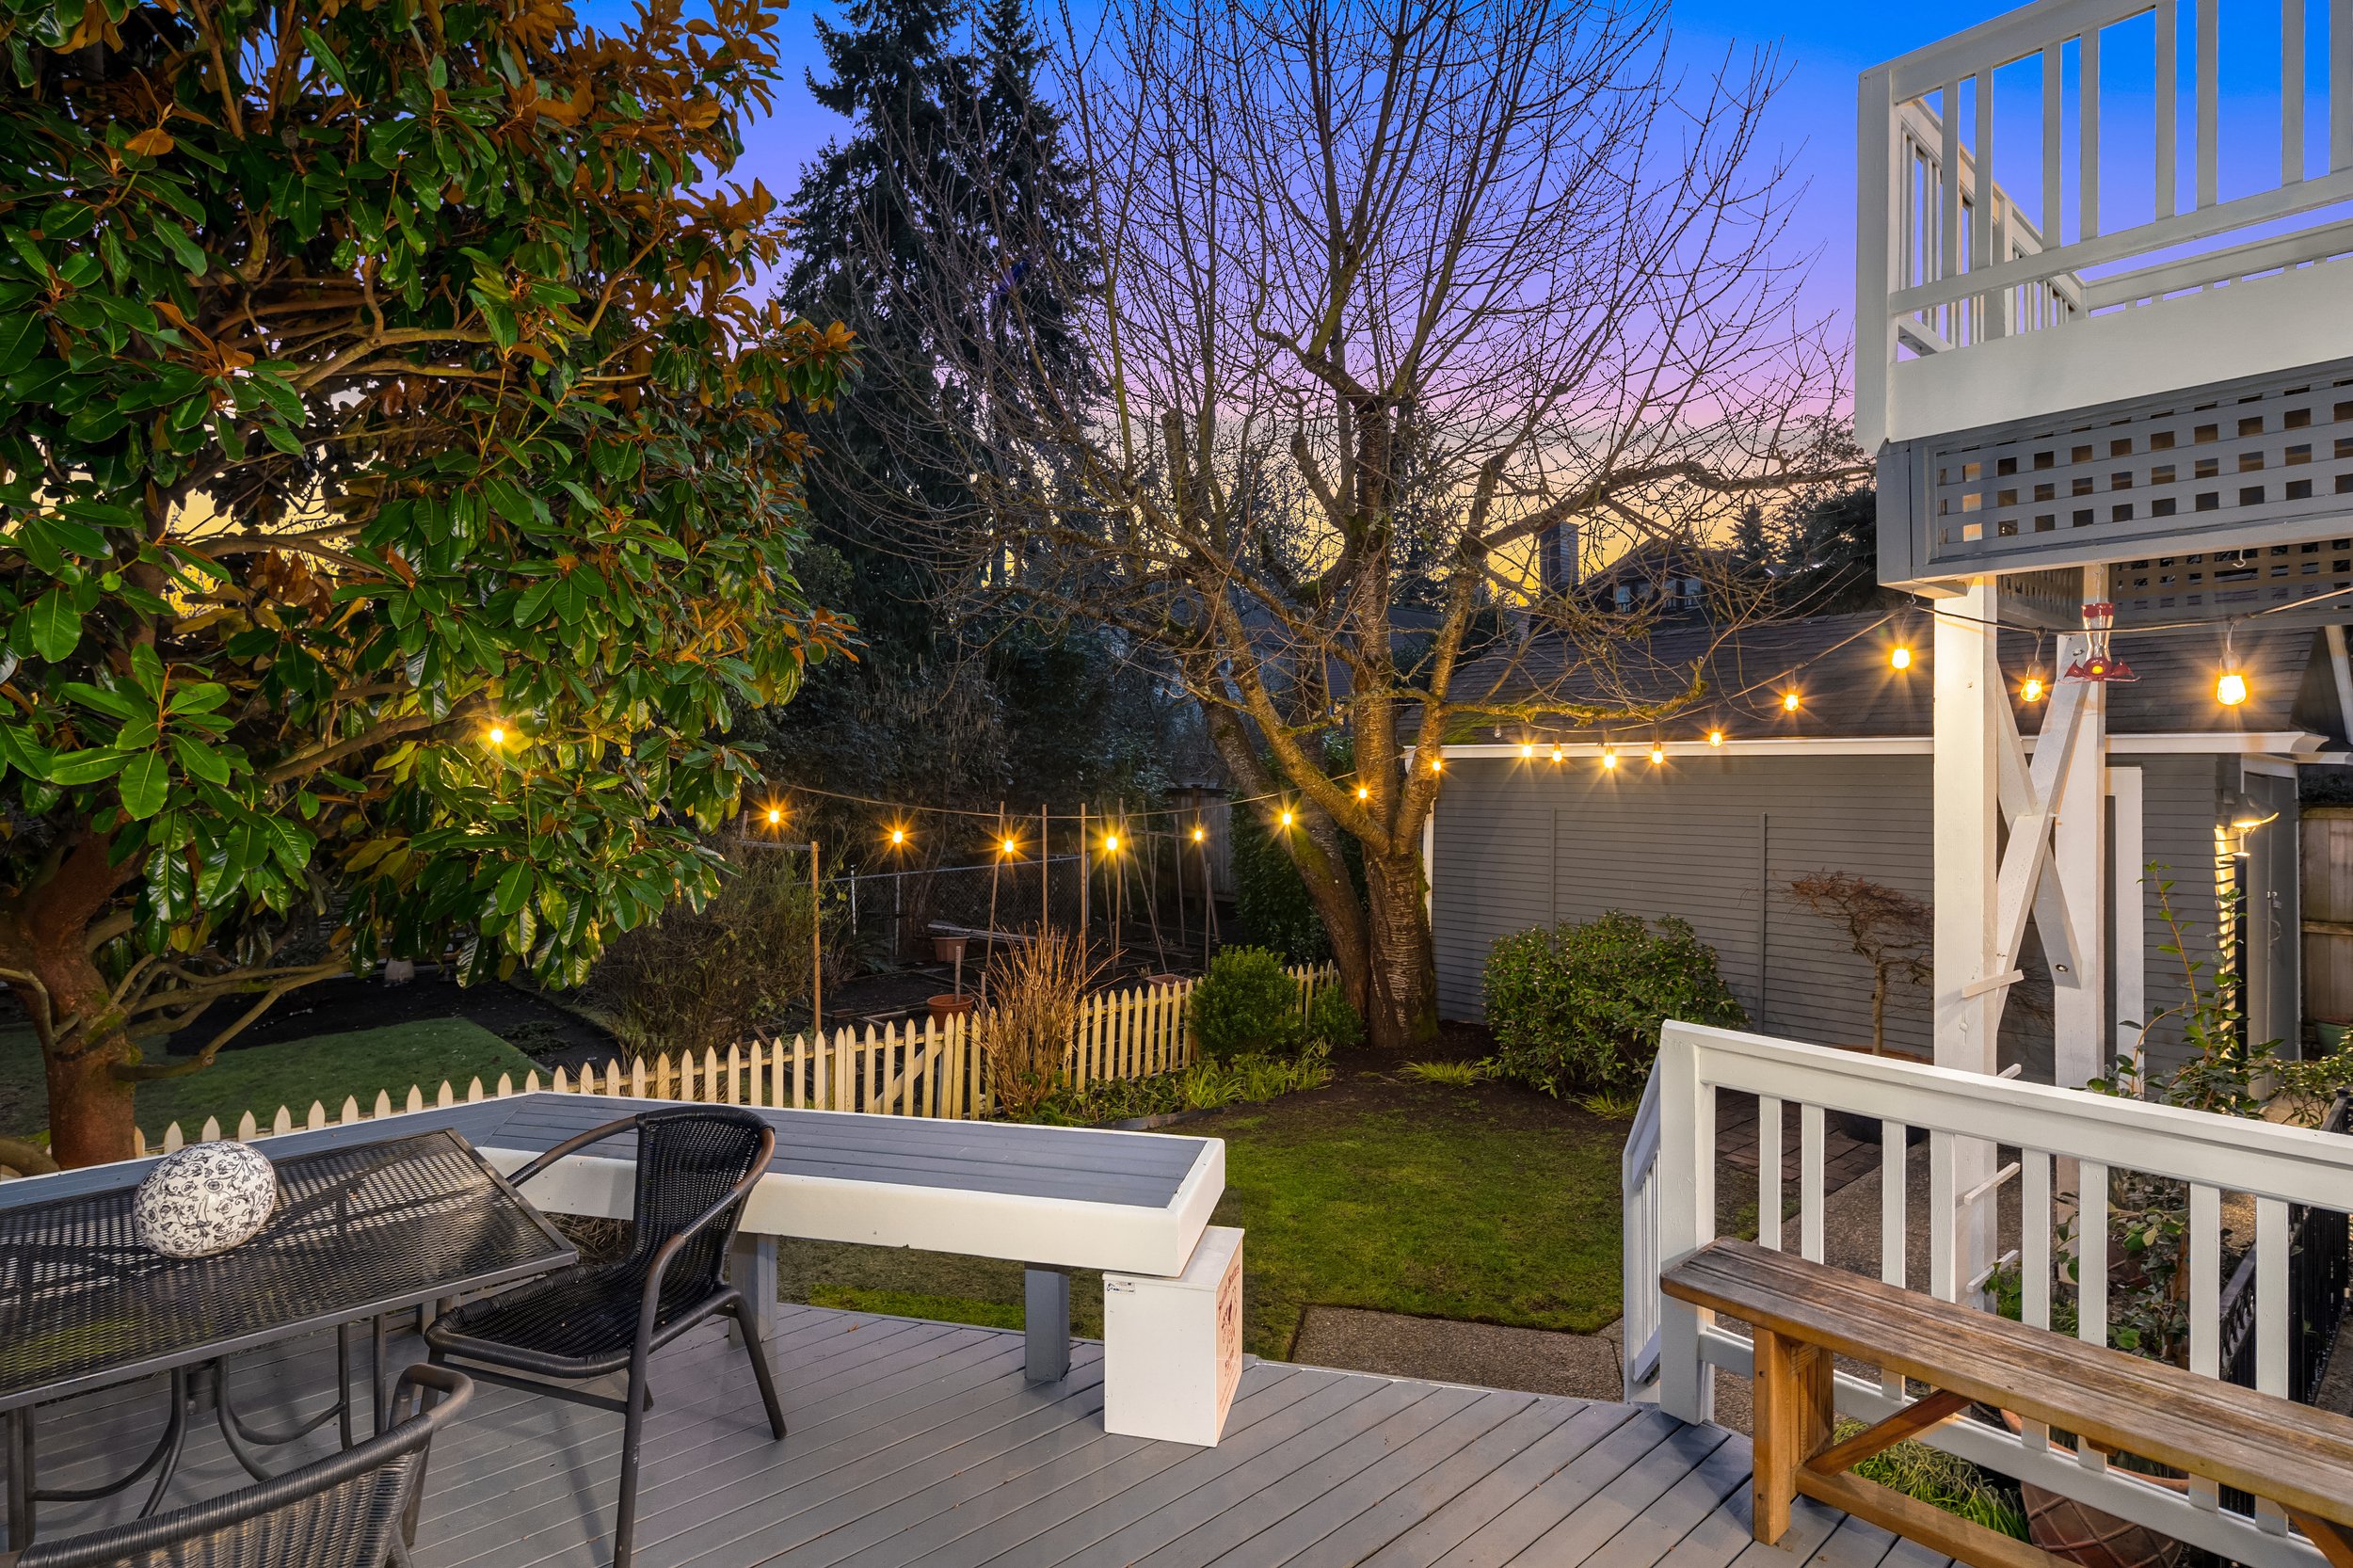  Deck off the kitchen ensures indoor|outdoor living comes full circle, offering inviting spaces for dining al fresco. The garden offers plenty of space for those with a green thumb. 